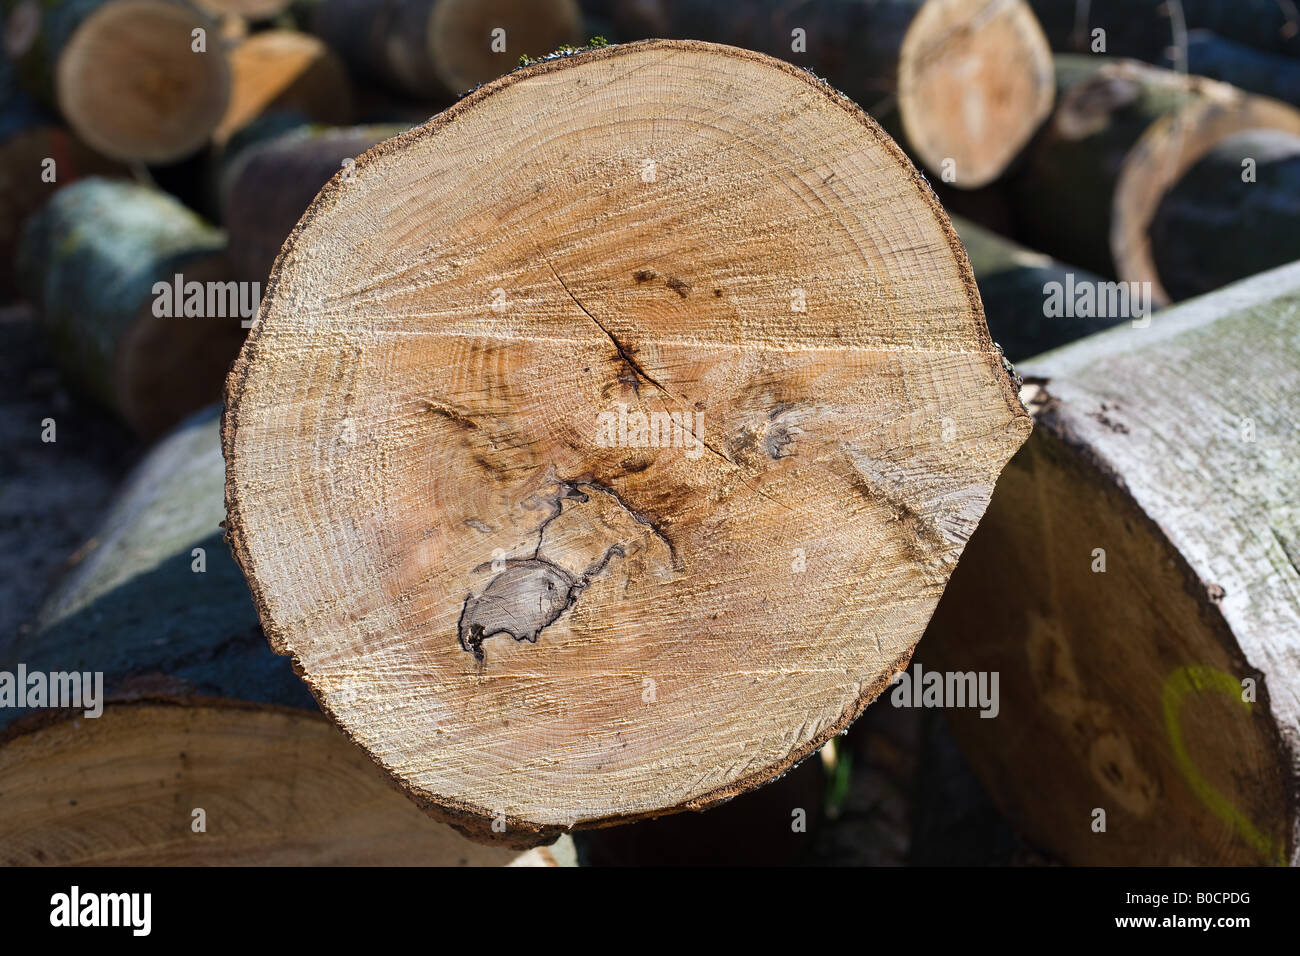 CROSS SECTION OF A BEECH TREE TRUNK SHOWING GROWTH RINGS ALSACE FRANCE Stock Photo